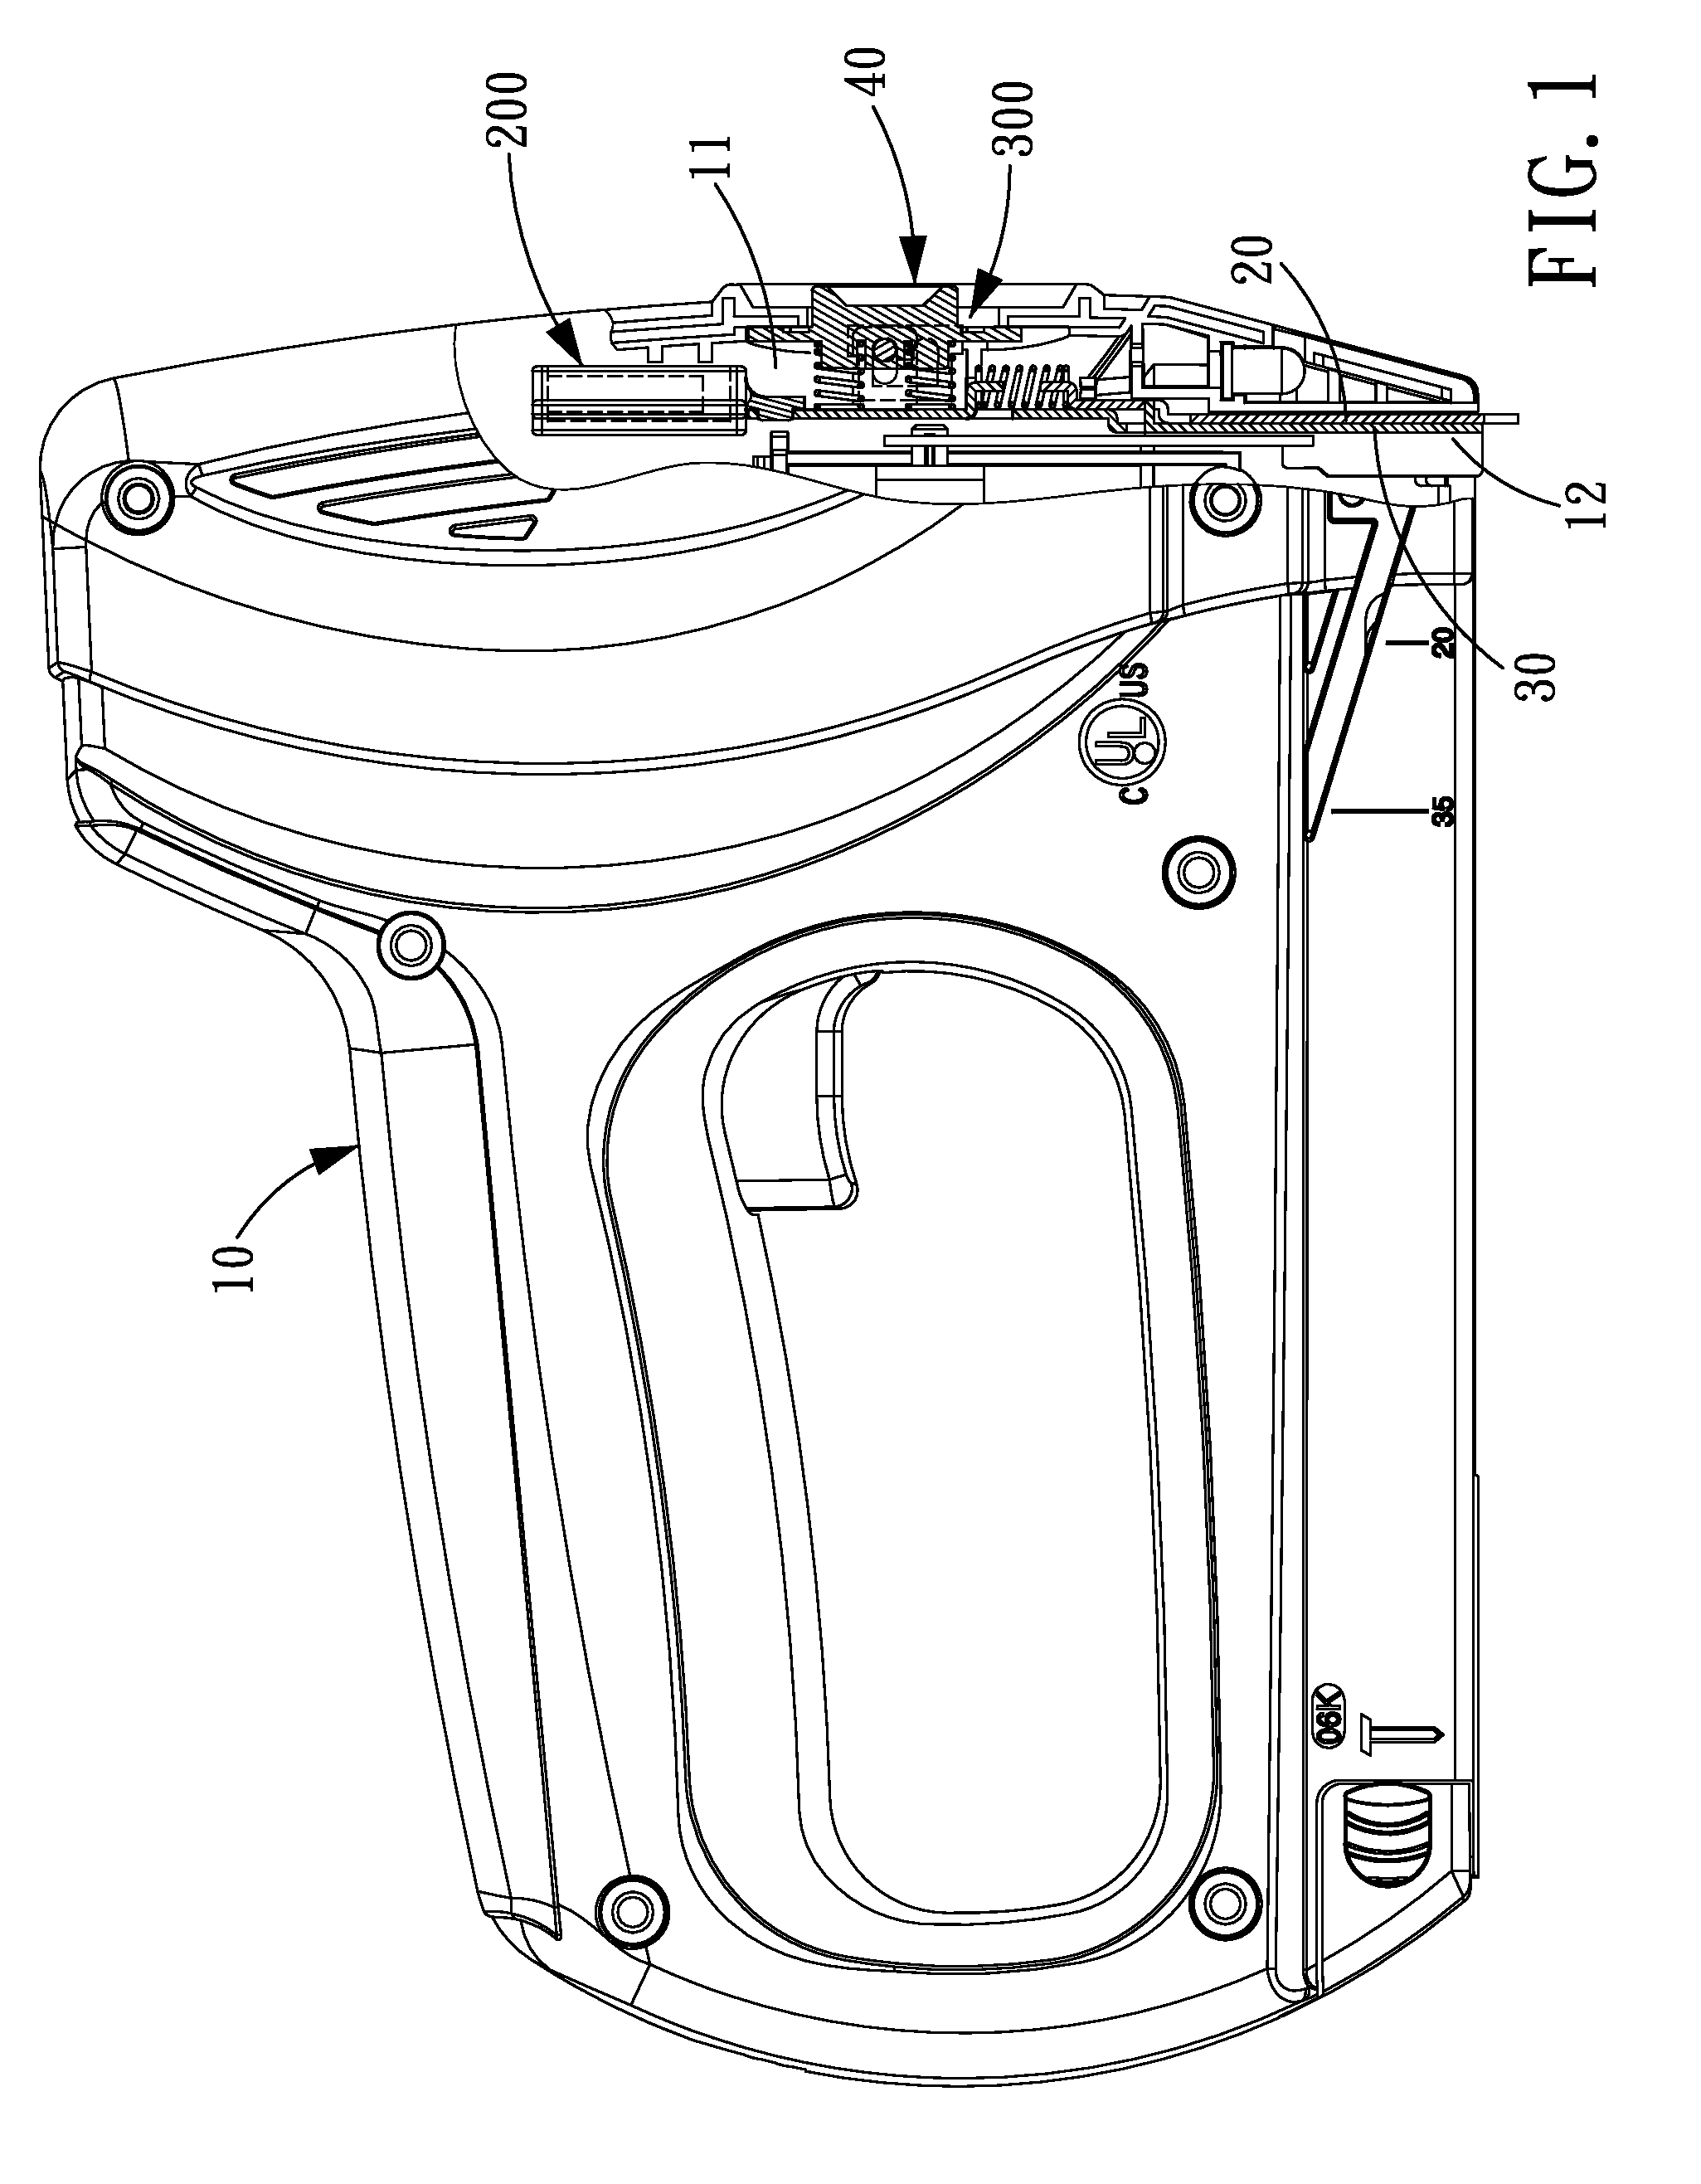 Staple Gun with a Safety Device and Its Safety Device